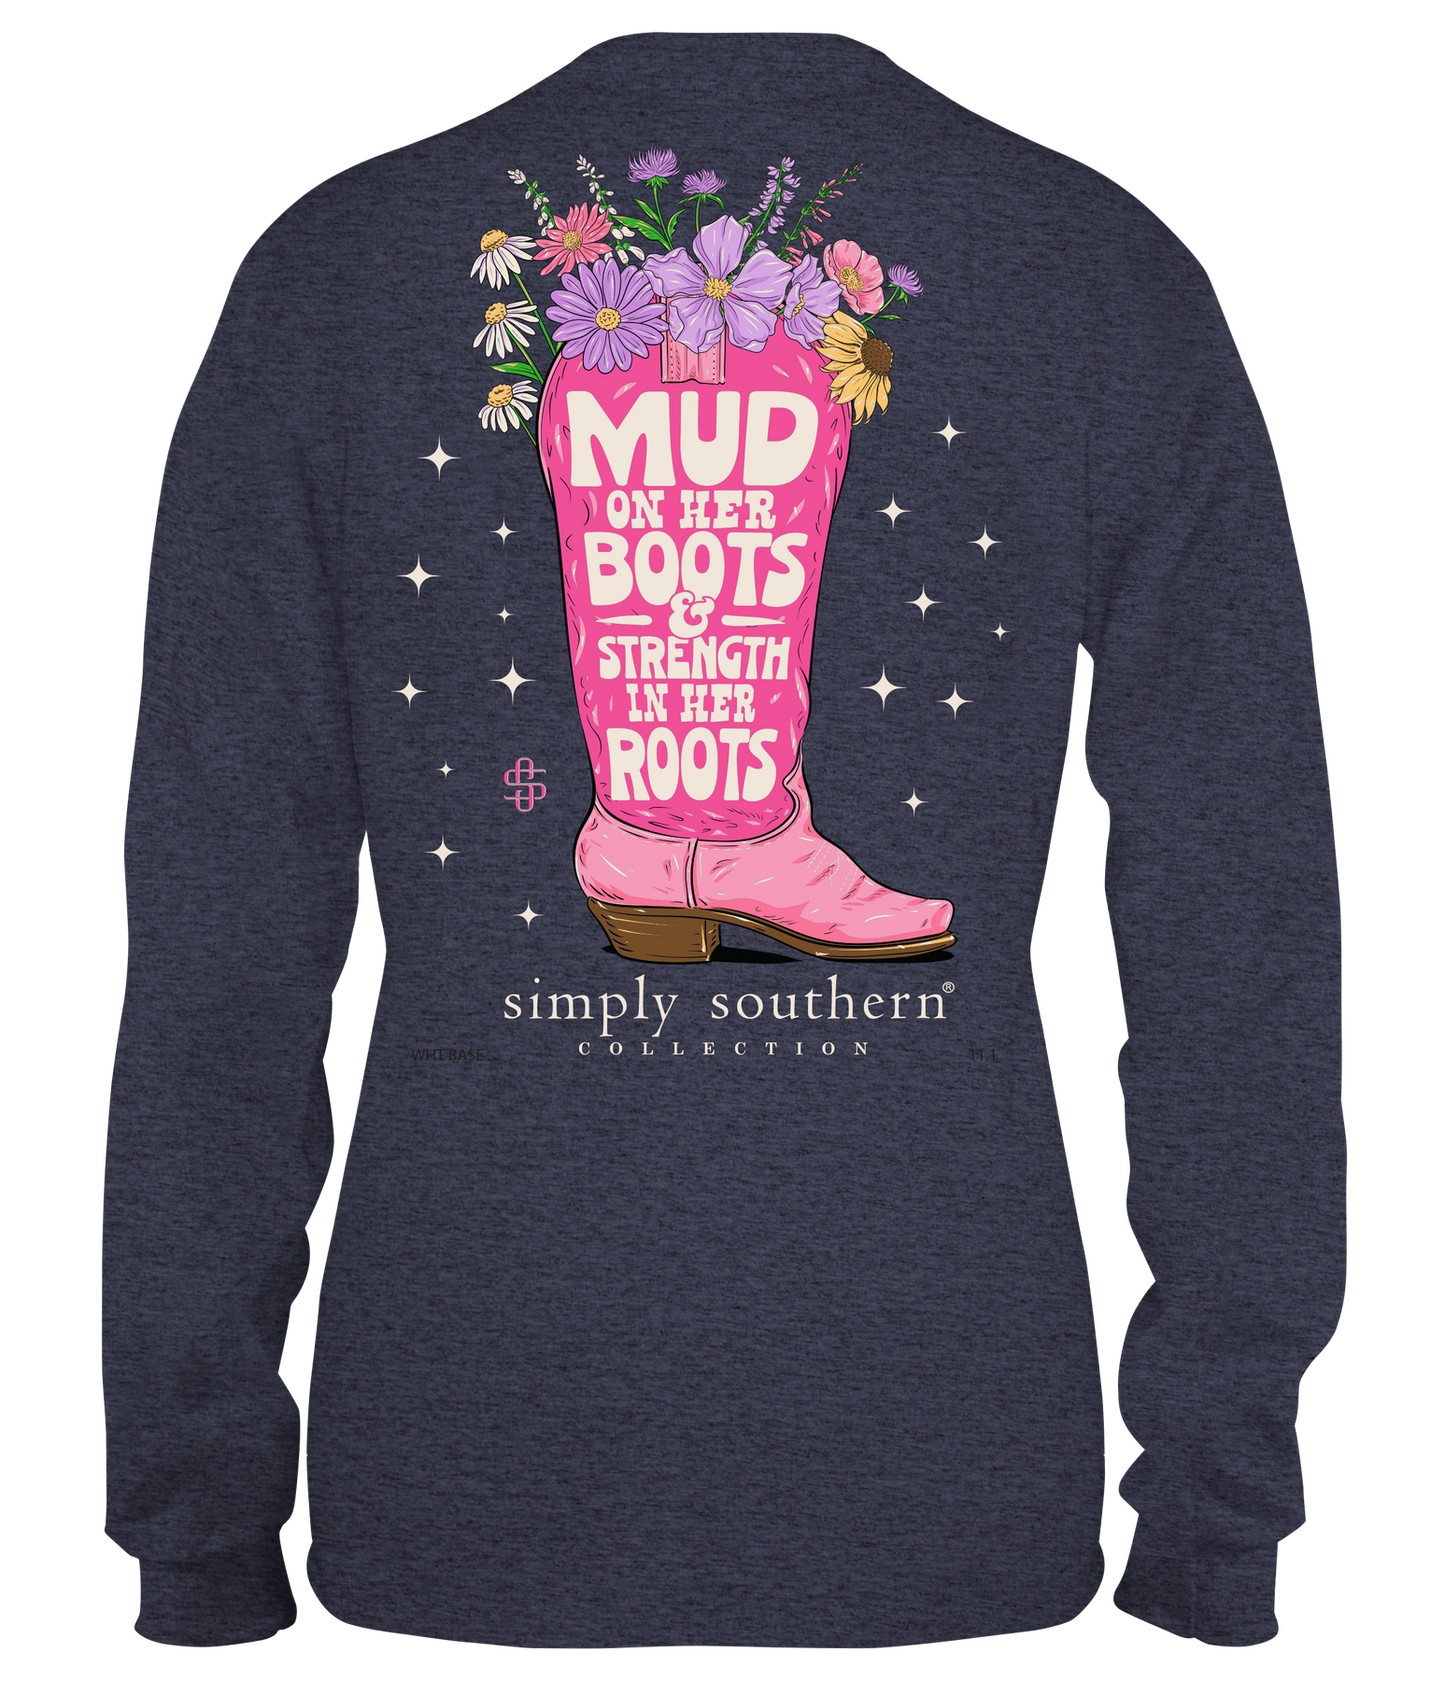 FINAL SALE - Simply Southern - Mud on Her Boots, Strength in Her Roots Long Sleeve Tee